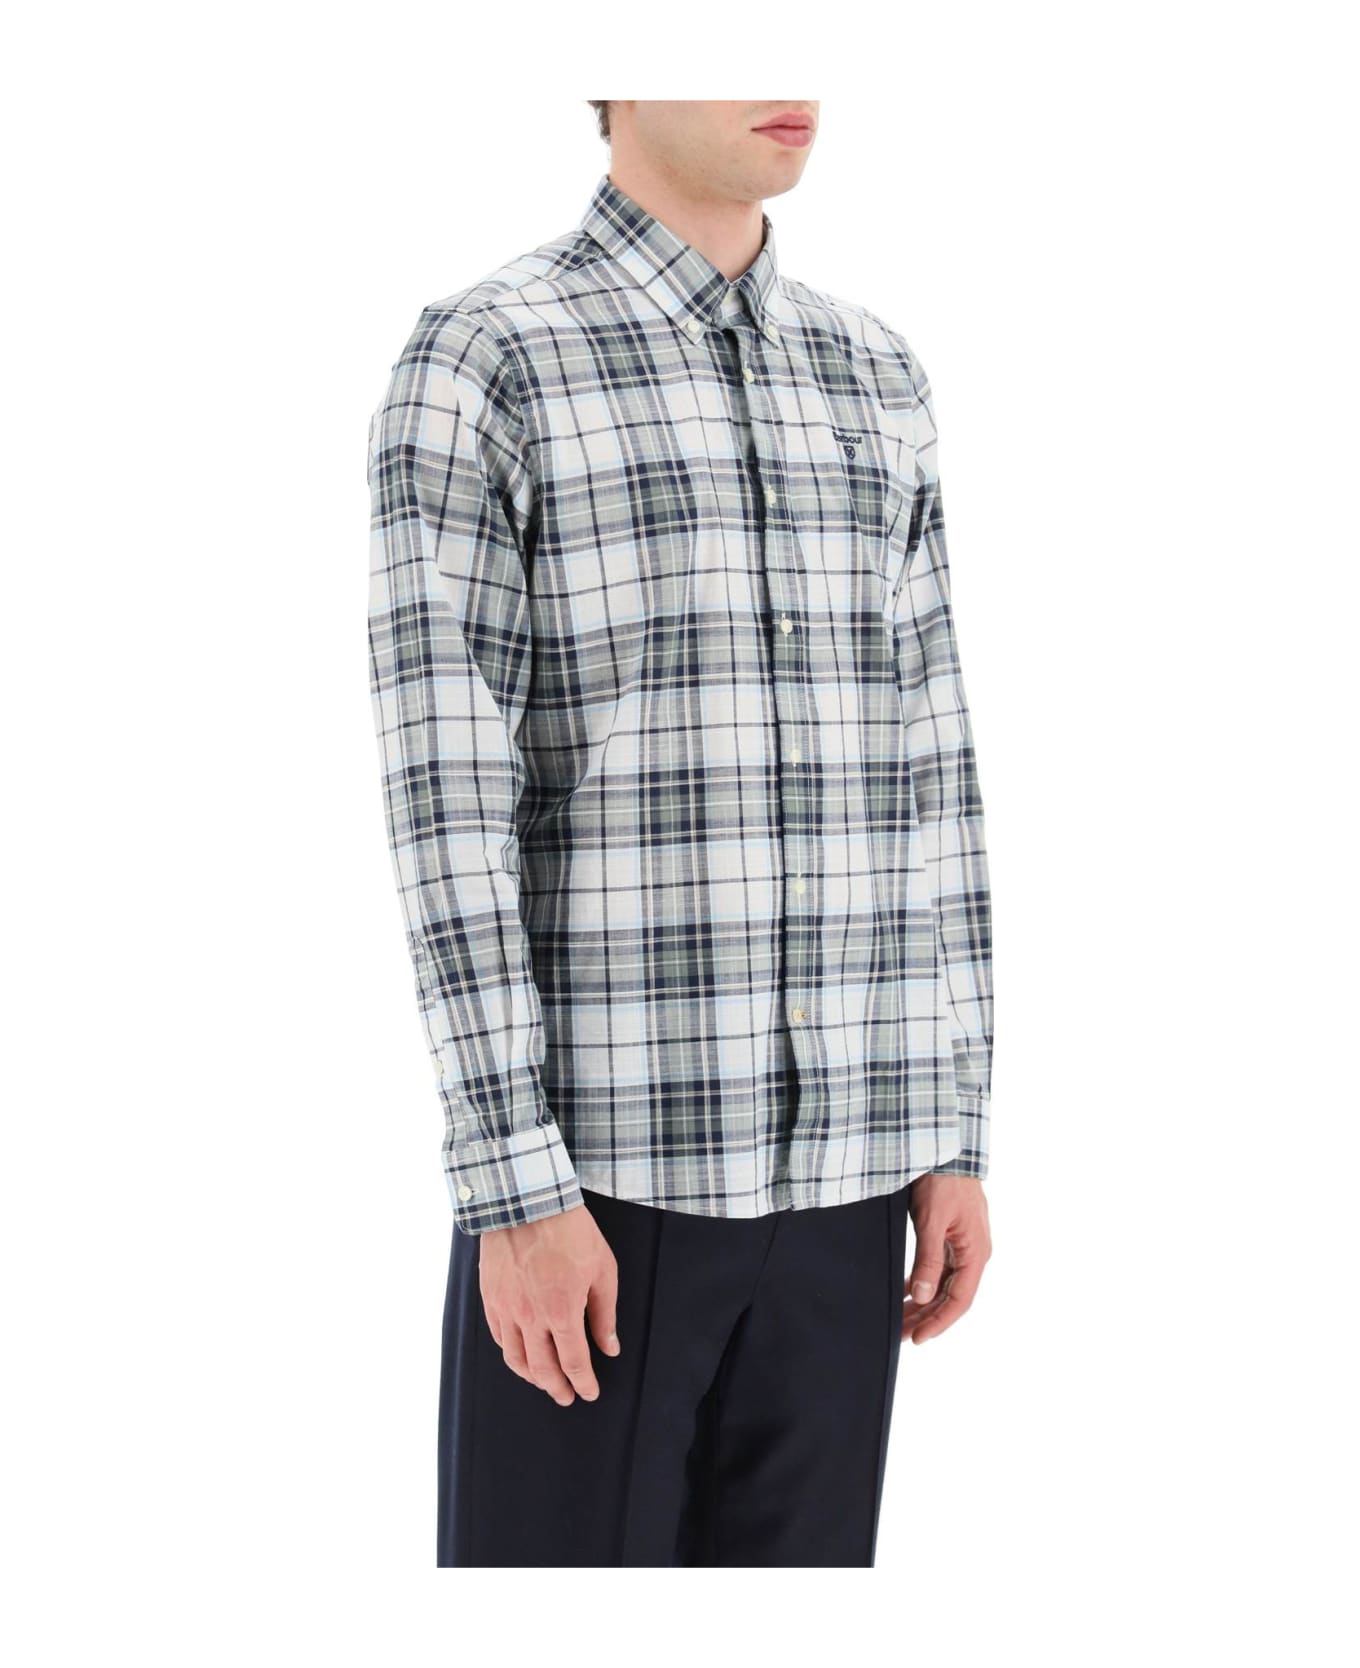 Barbour Multicolor Cotton Shirt - AGAVE GREEN